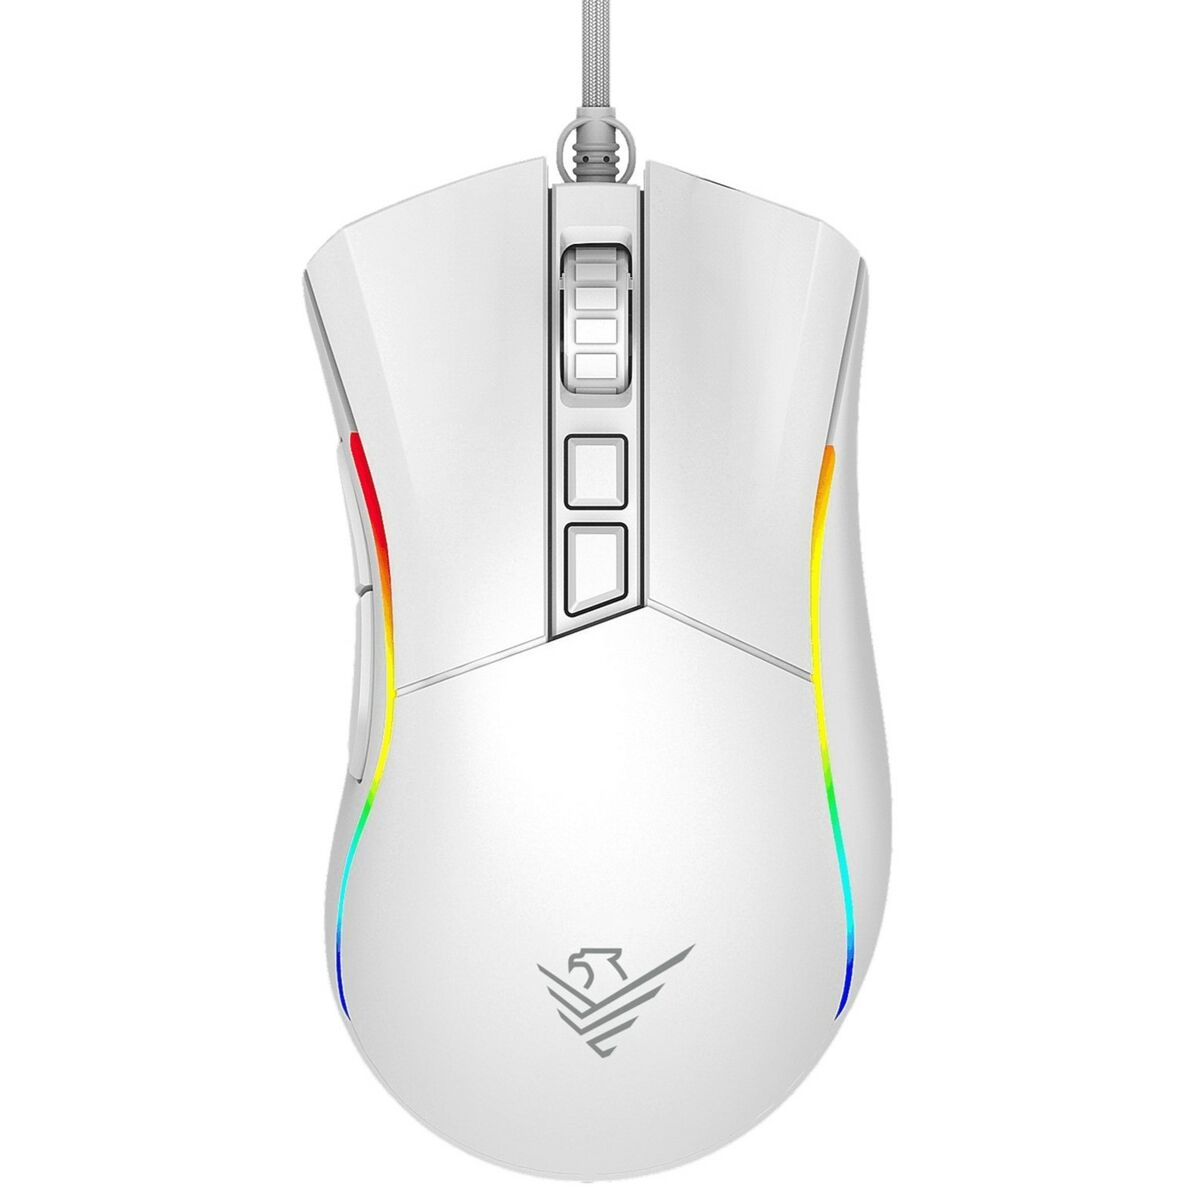 Optical mouse Phoenix VOID White (1 Unit), Phoenix, Computing, Accessories, optical-mouse-phoenix-void-white-1-unit, Brand_Phoenix, category-reference-2609, category-reference-2642, category-reference-2656, category-reference-t-19685, category-reference-t-19908, category-reference-t-21353, category-reference-t-25626, computers / peripherals, Condition_NEW, office, Price_20 - 50, Teleworking, RiotNook